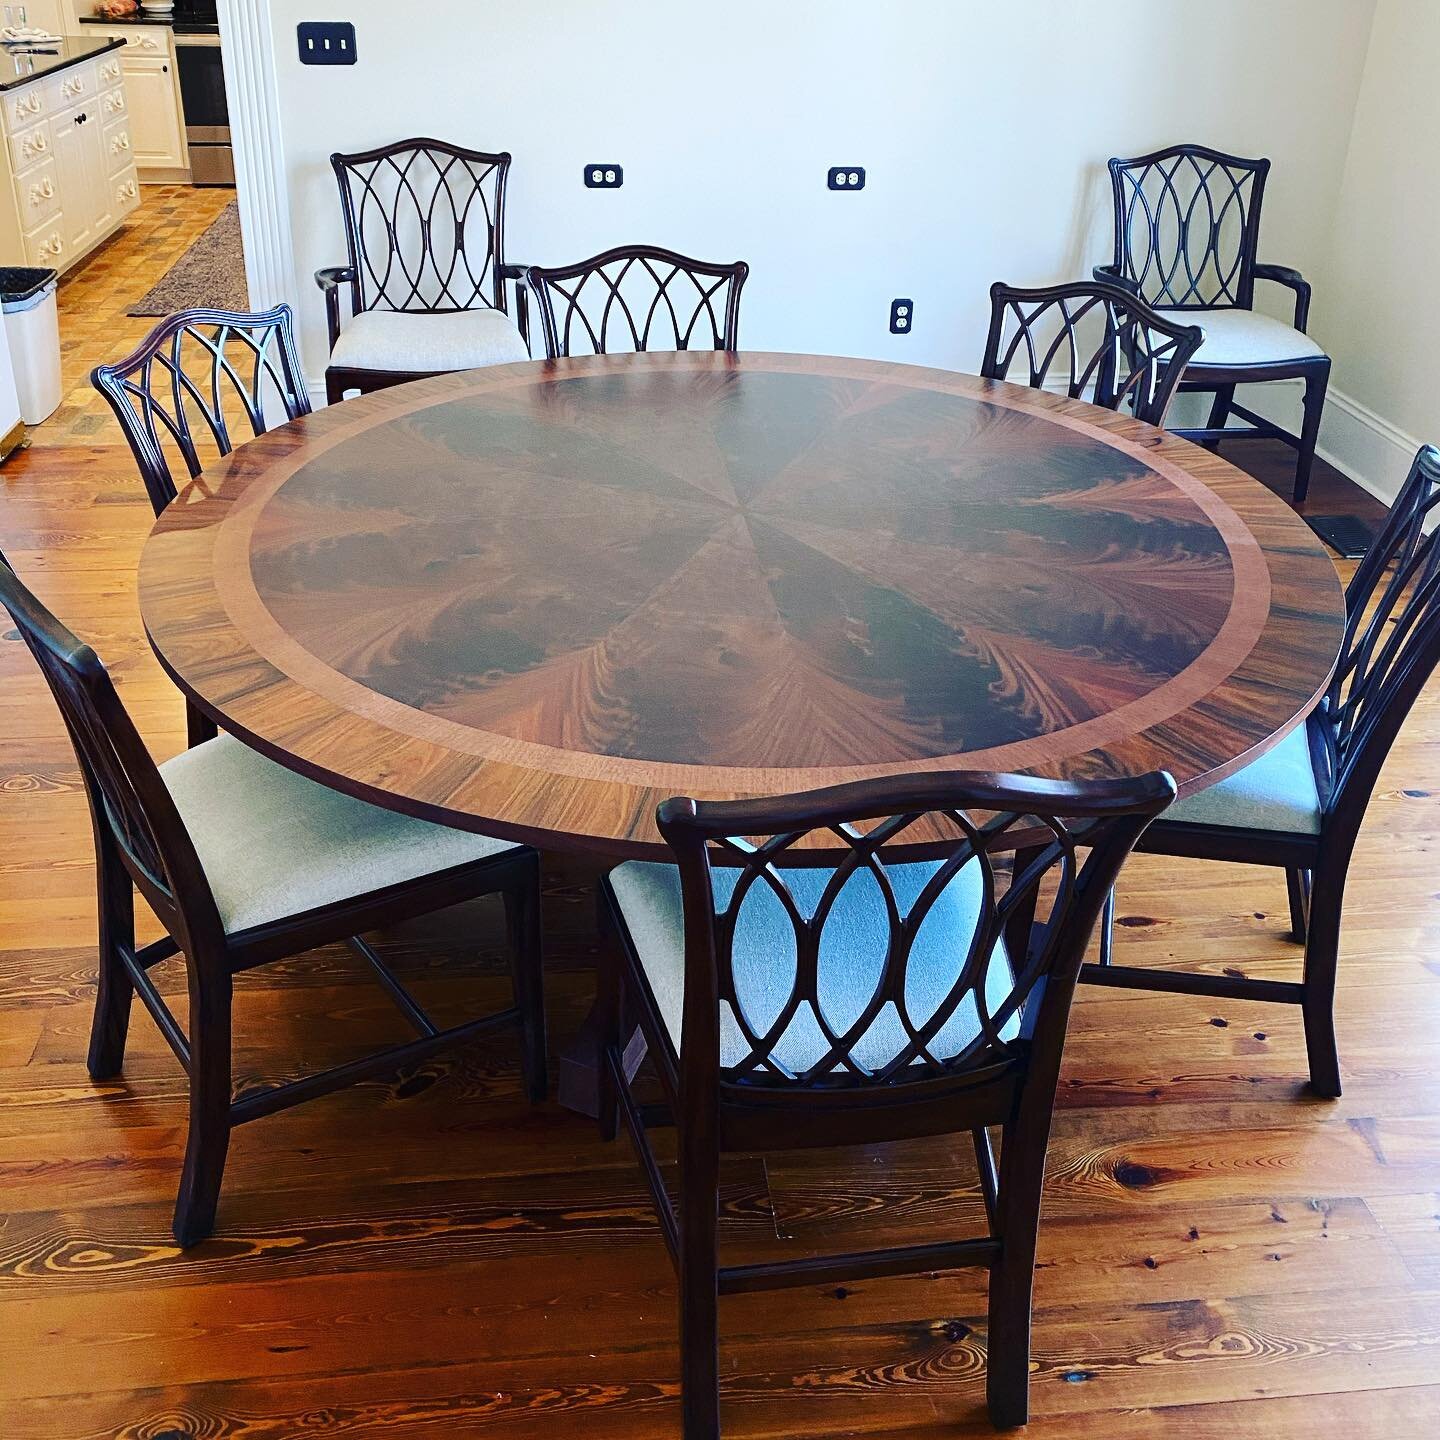 We can&rsquo;t wait to install the rest of this beautiful room.  This is the finished product of Smyda Woodworking&rsquo;s custom table we selected for our client.  Love using local Mississippi craftsmen to deliver amazing products!  #mississippi #mi